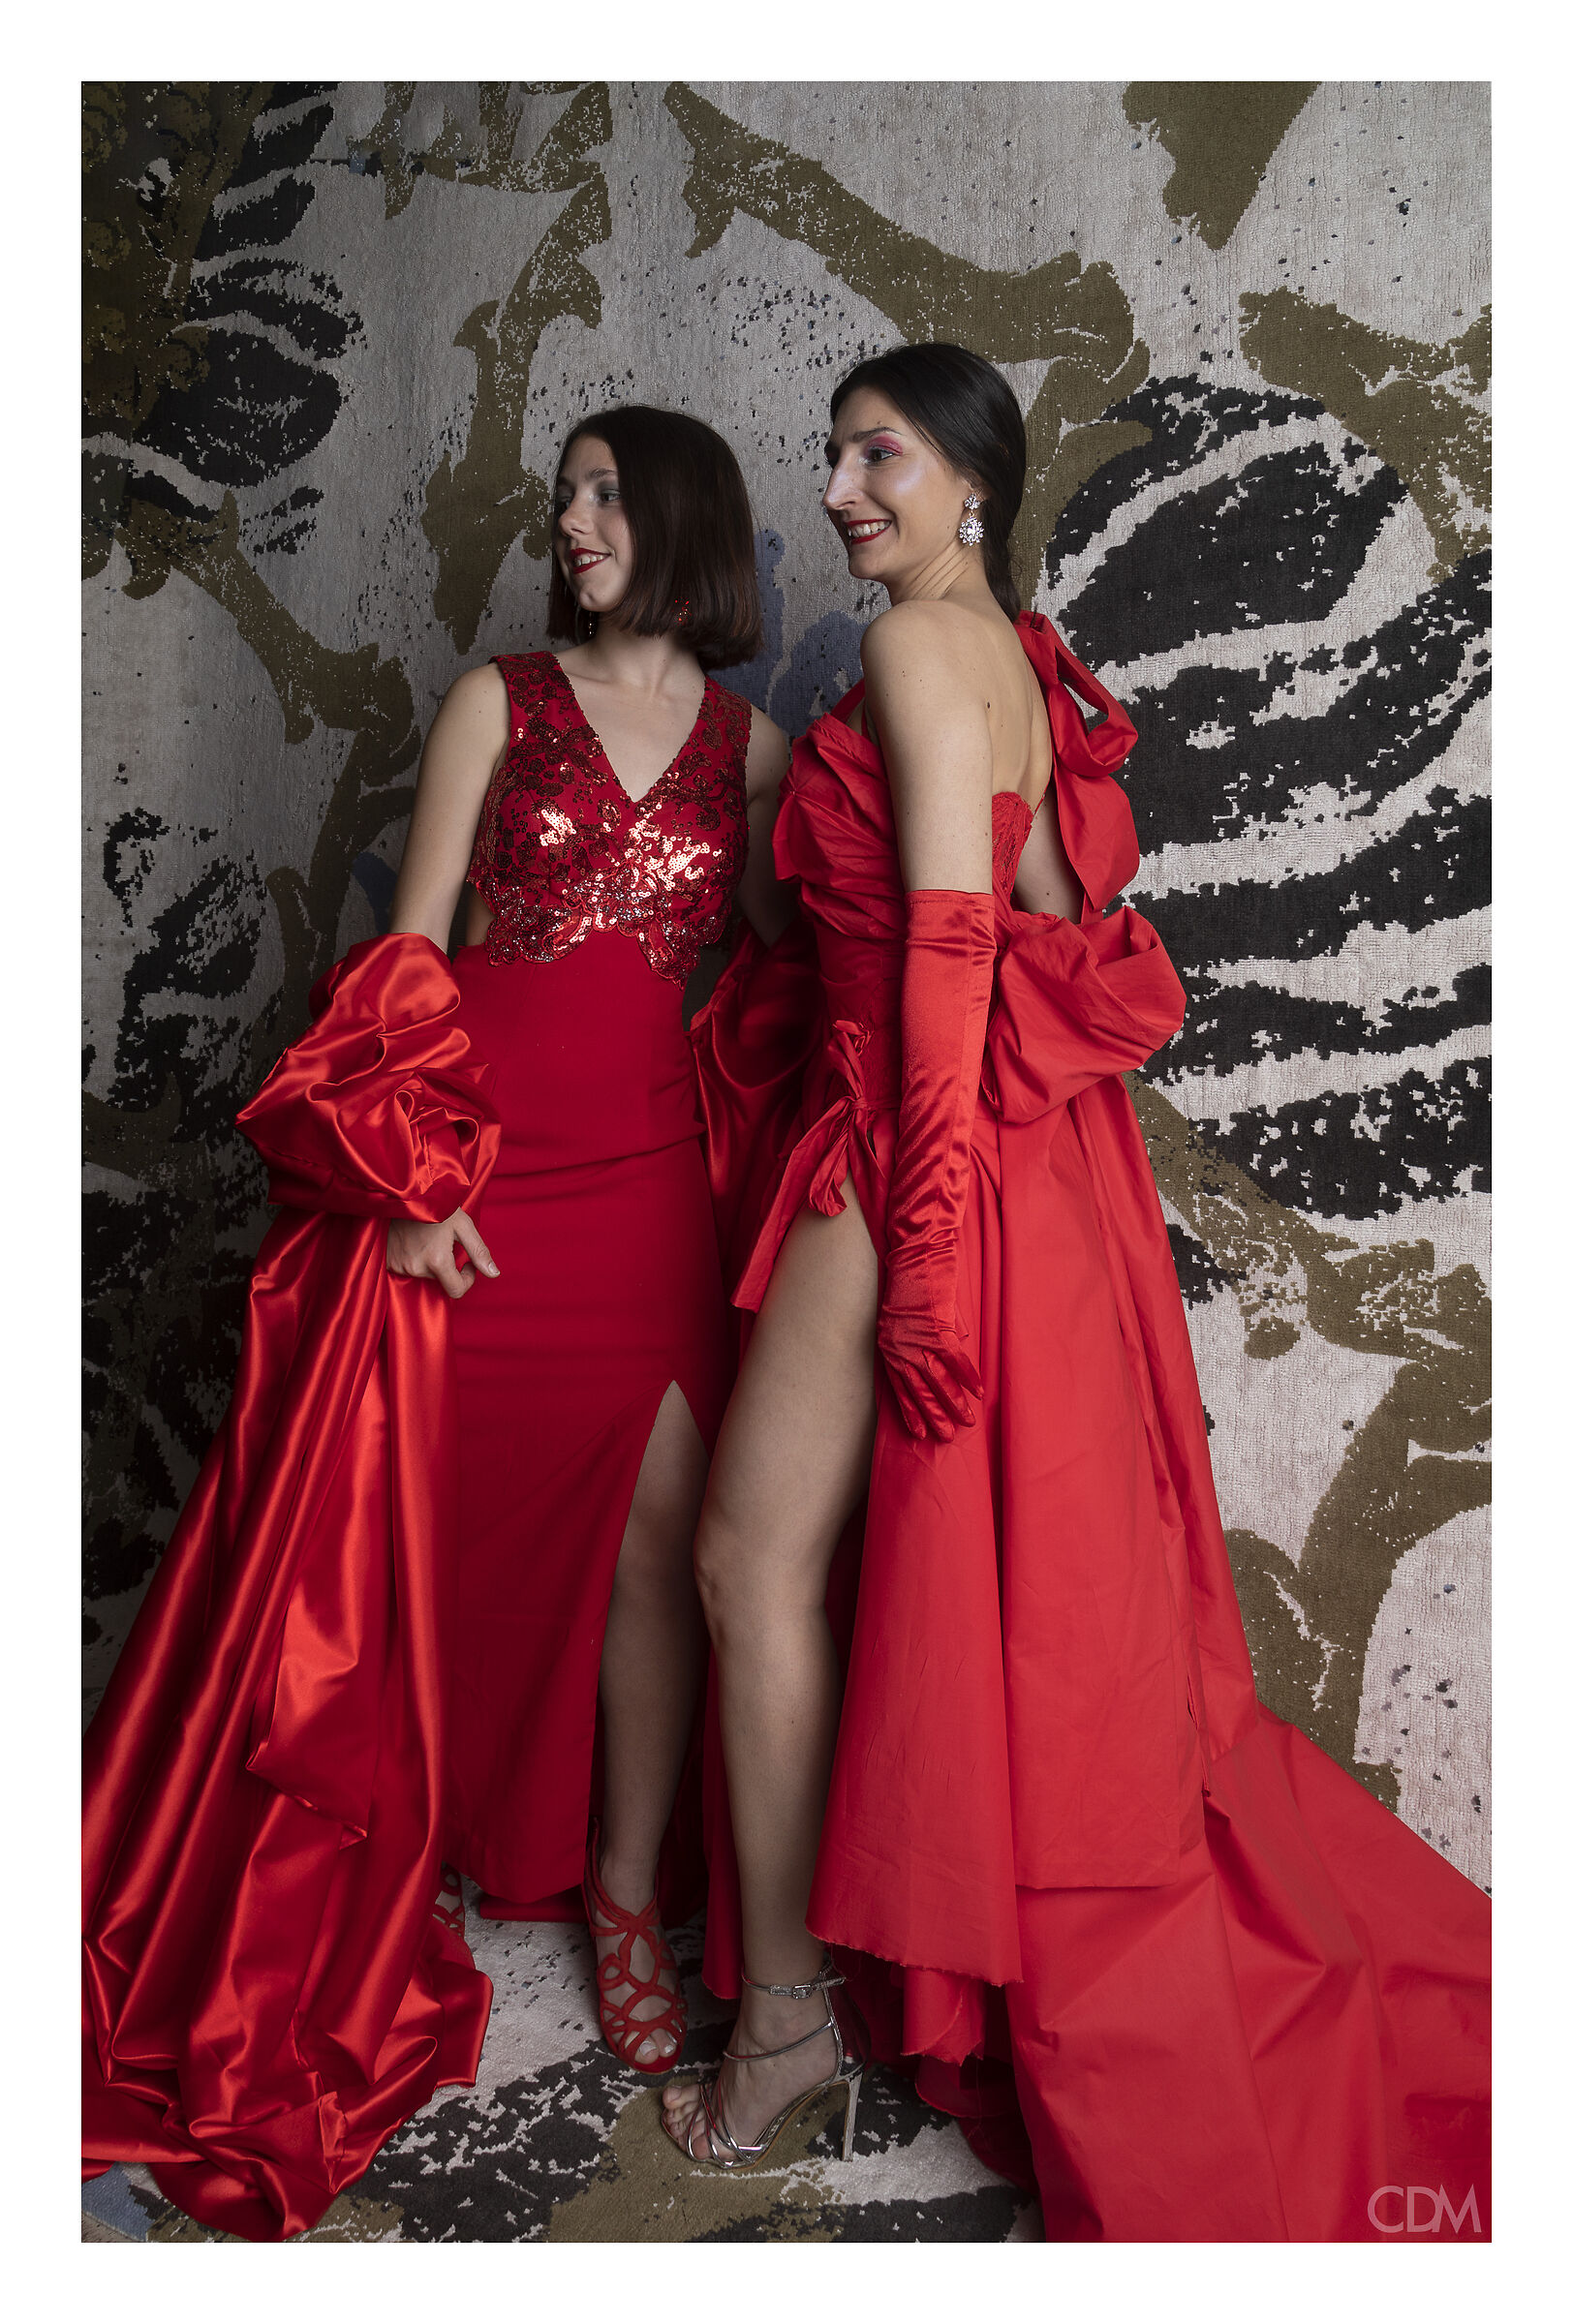 Angela and Valentina in red...